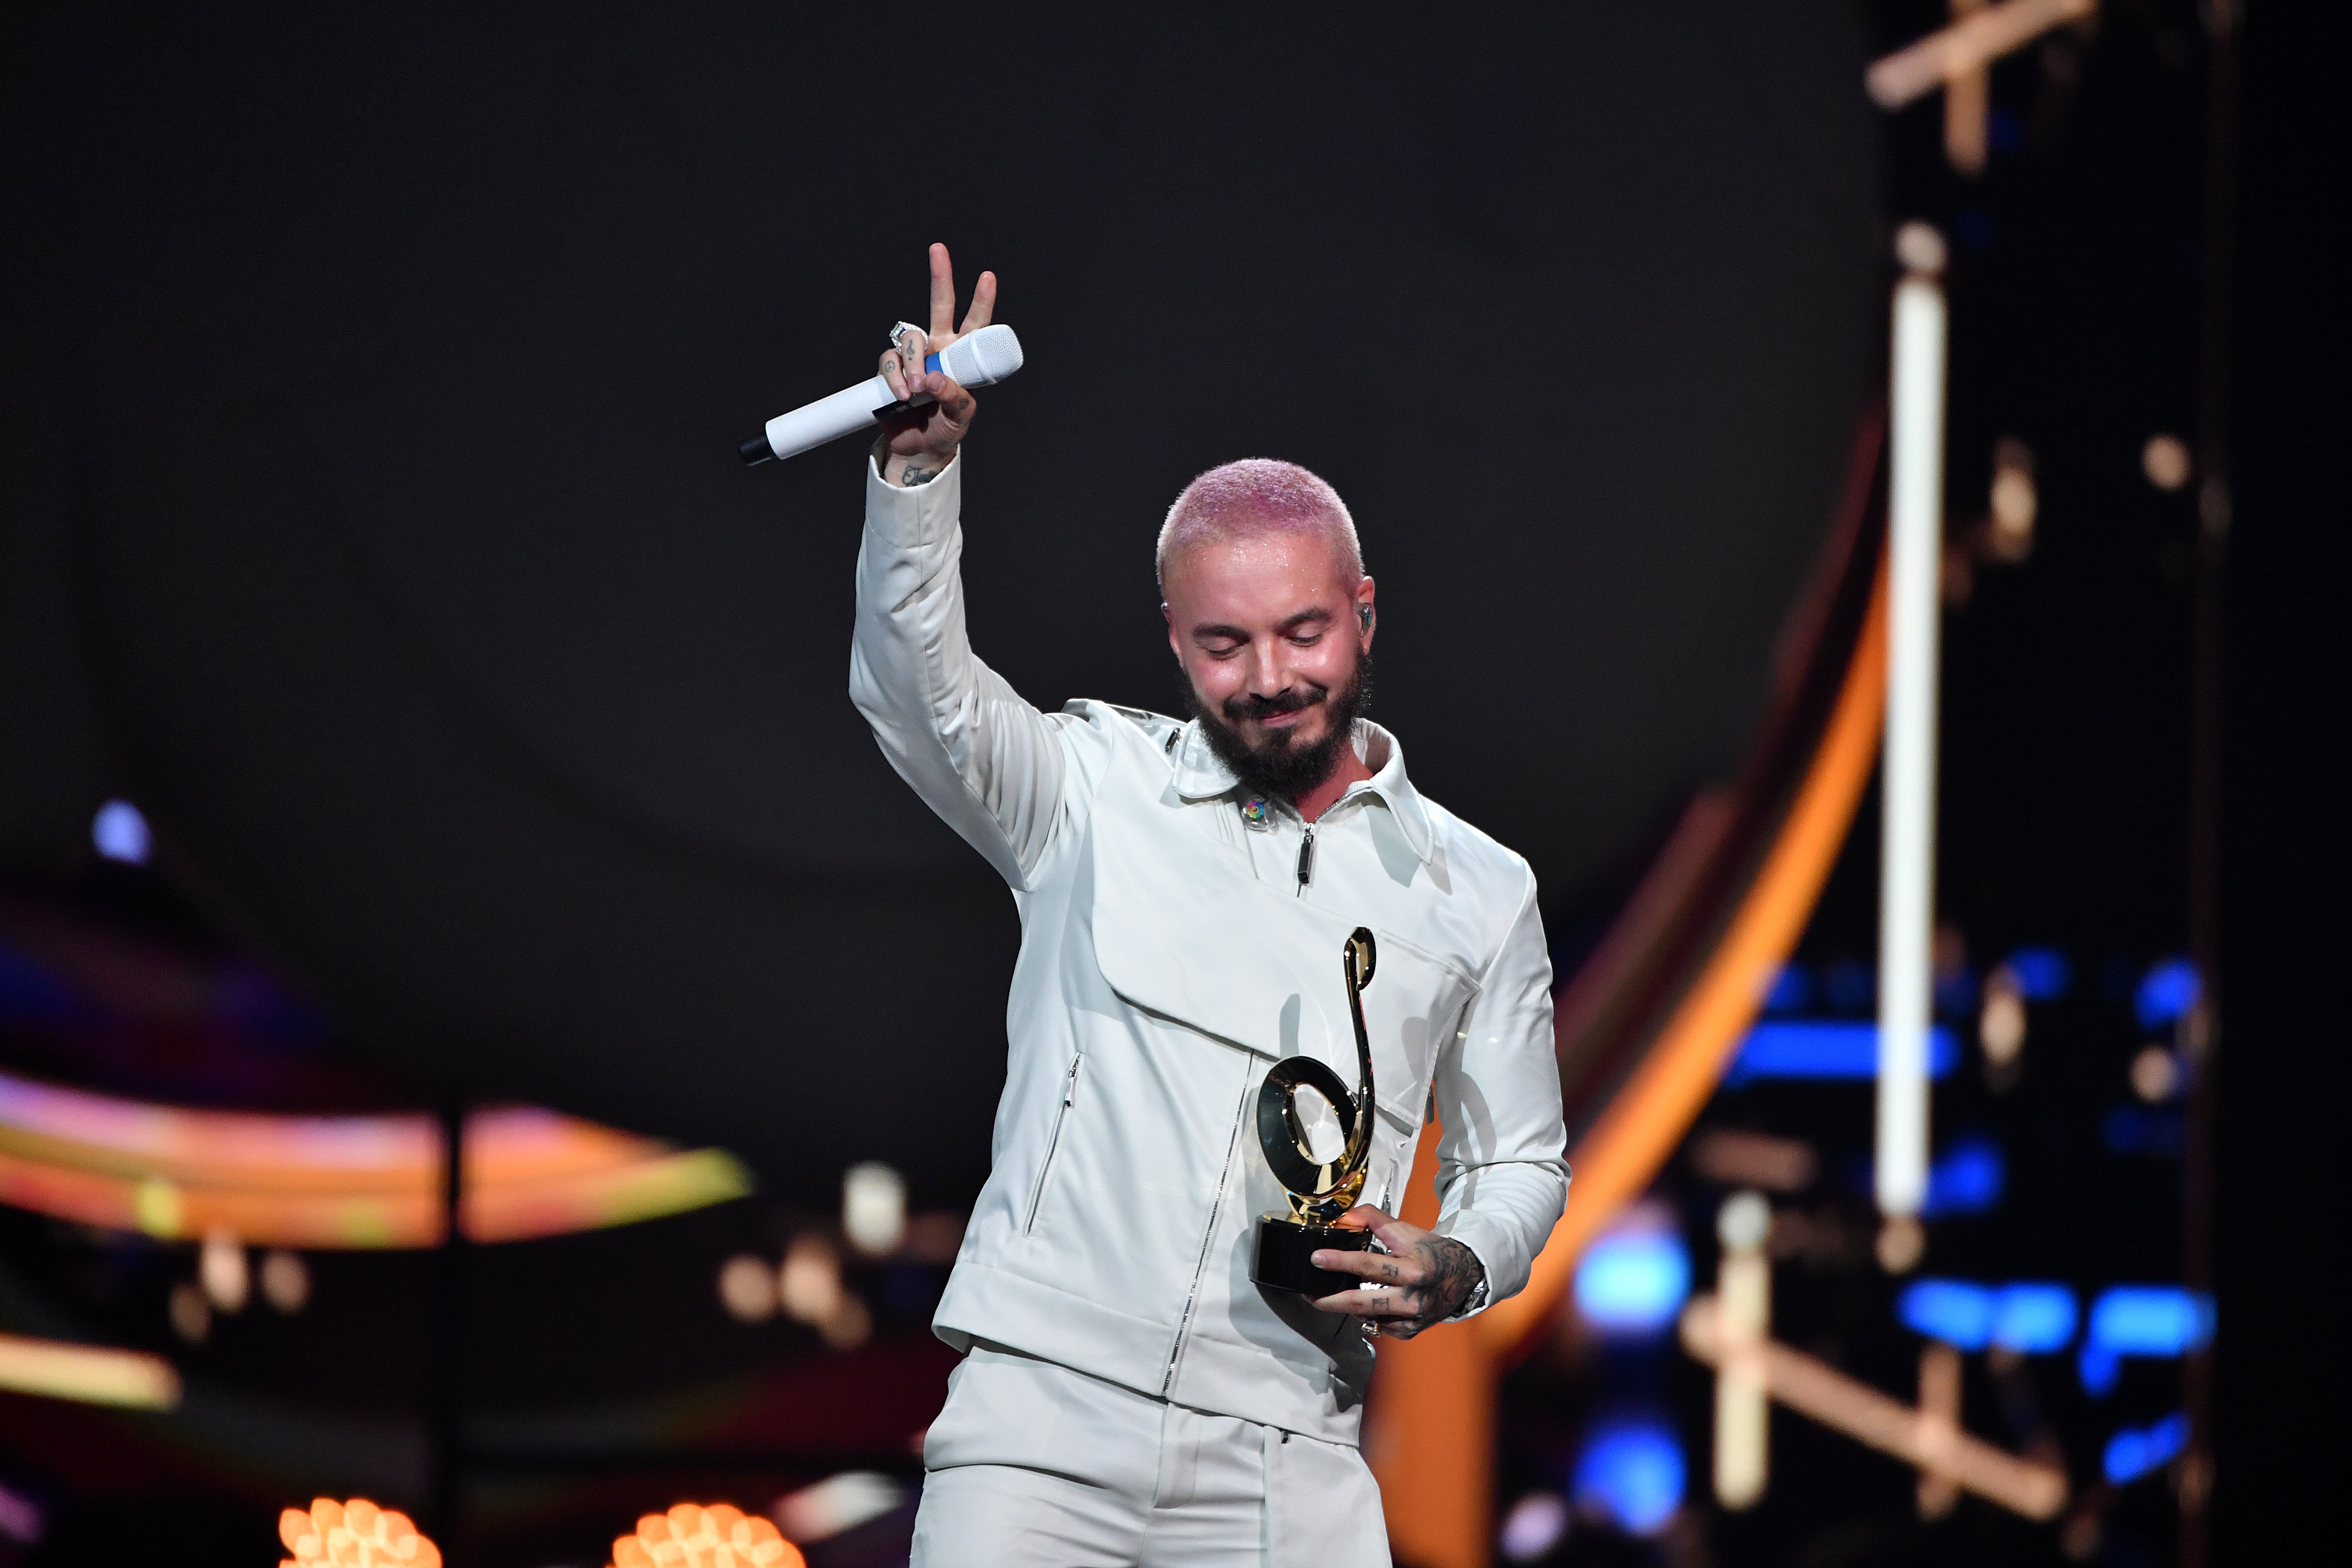 J Balvin To Receive the Style Icon Award at This Year's Latin